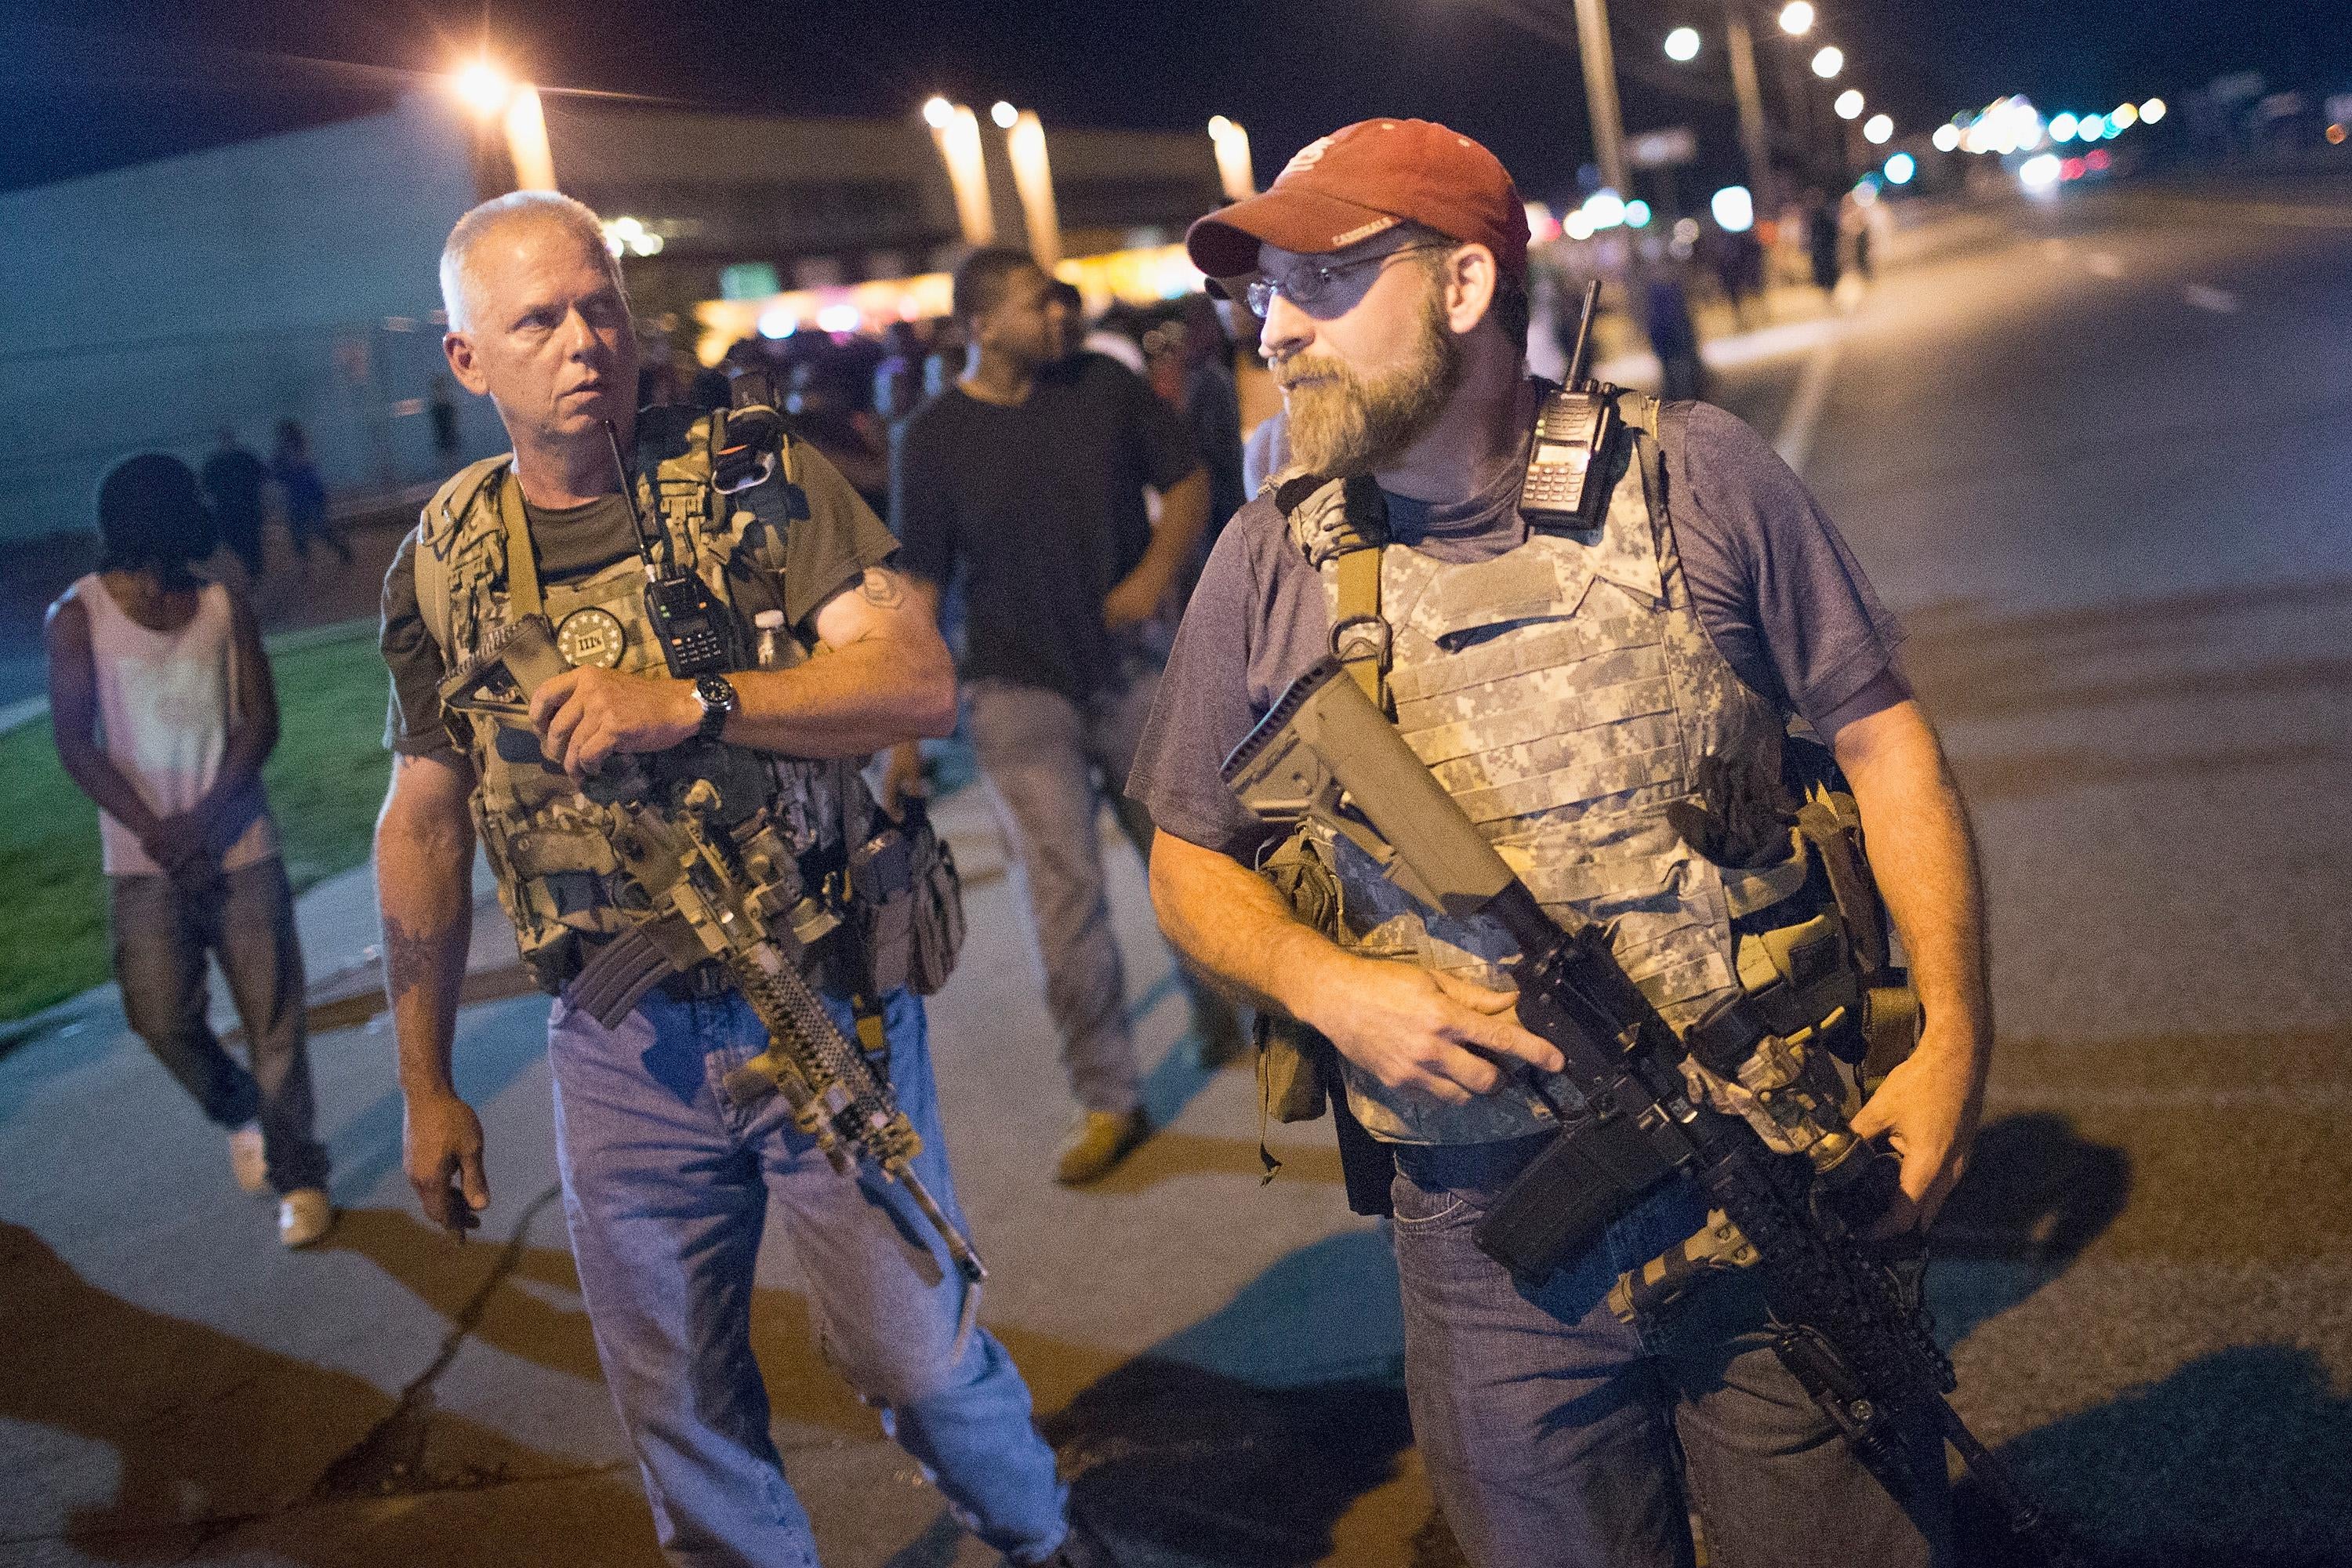 Two white men wearing camouflage vests and carrying big guns walk down a street at night